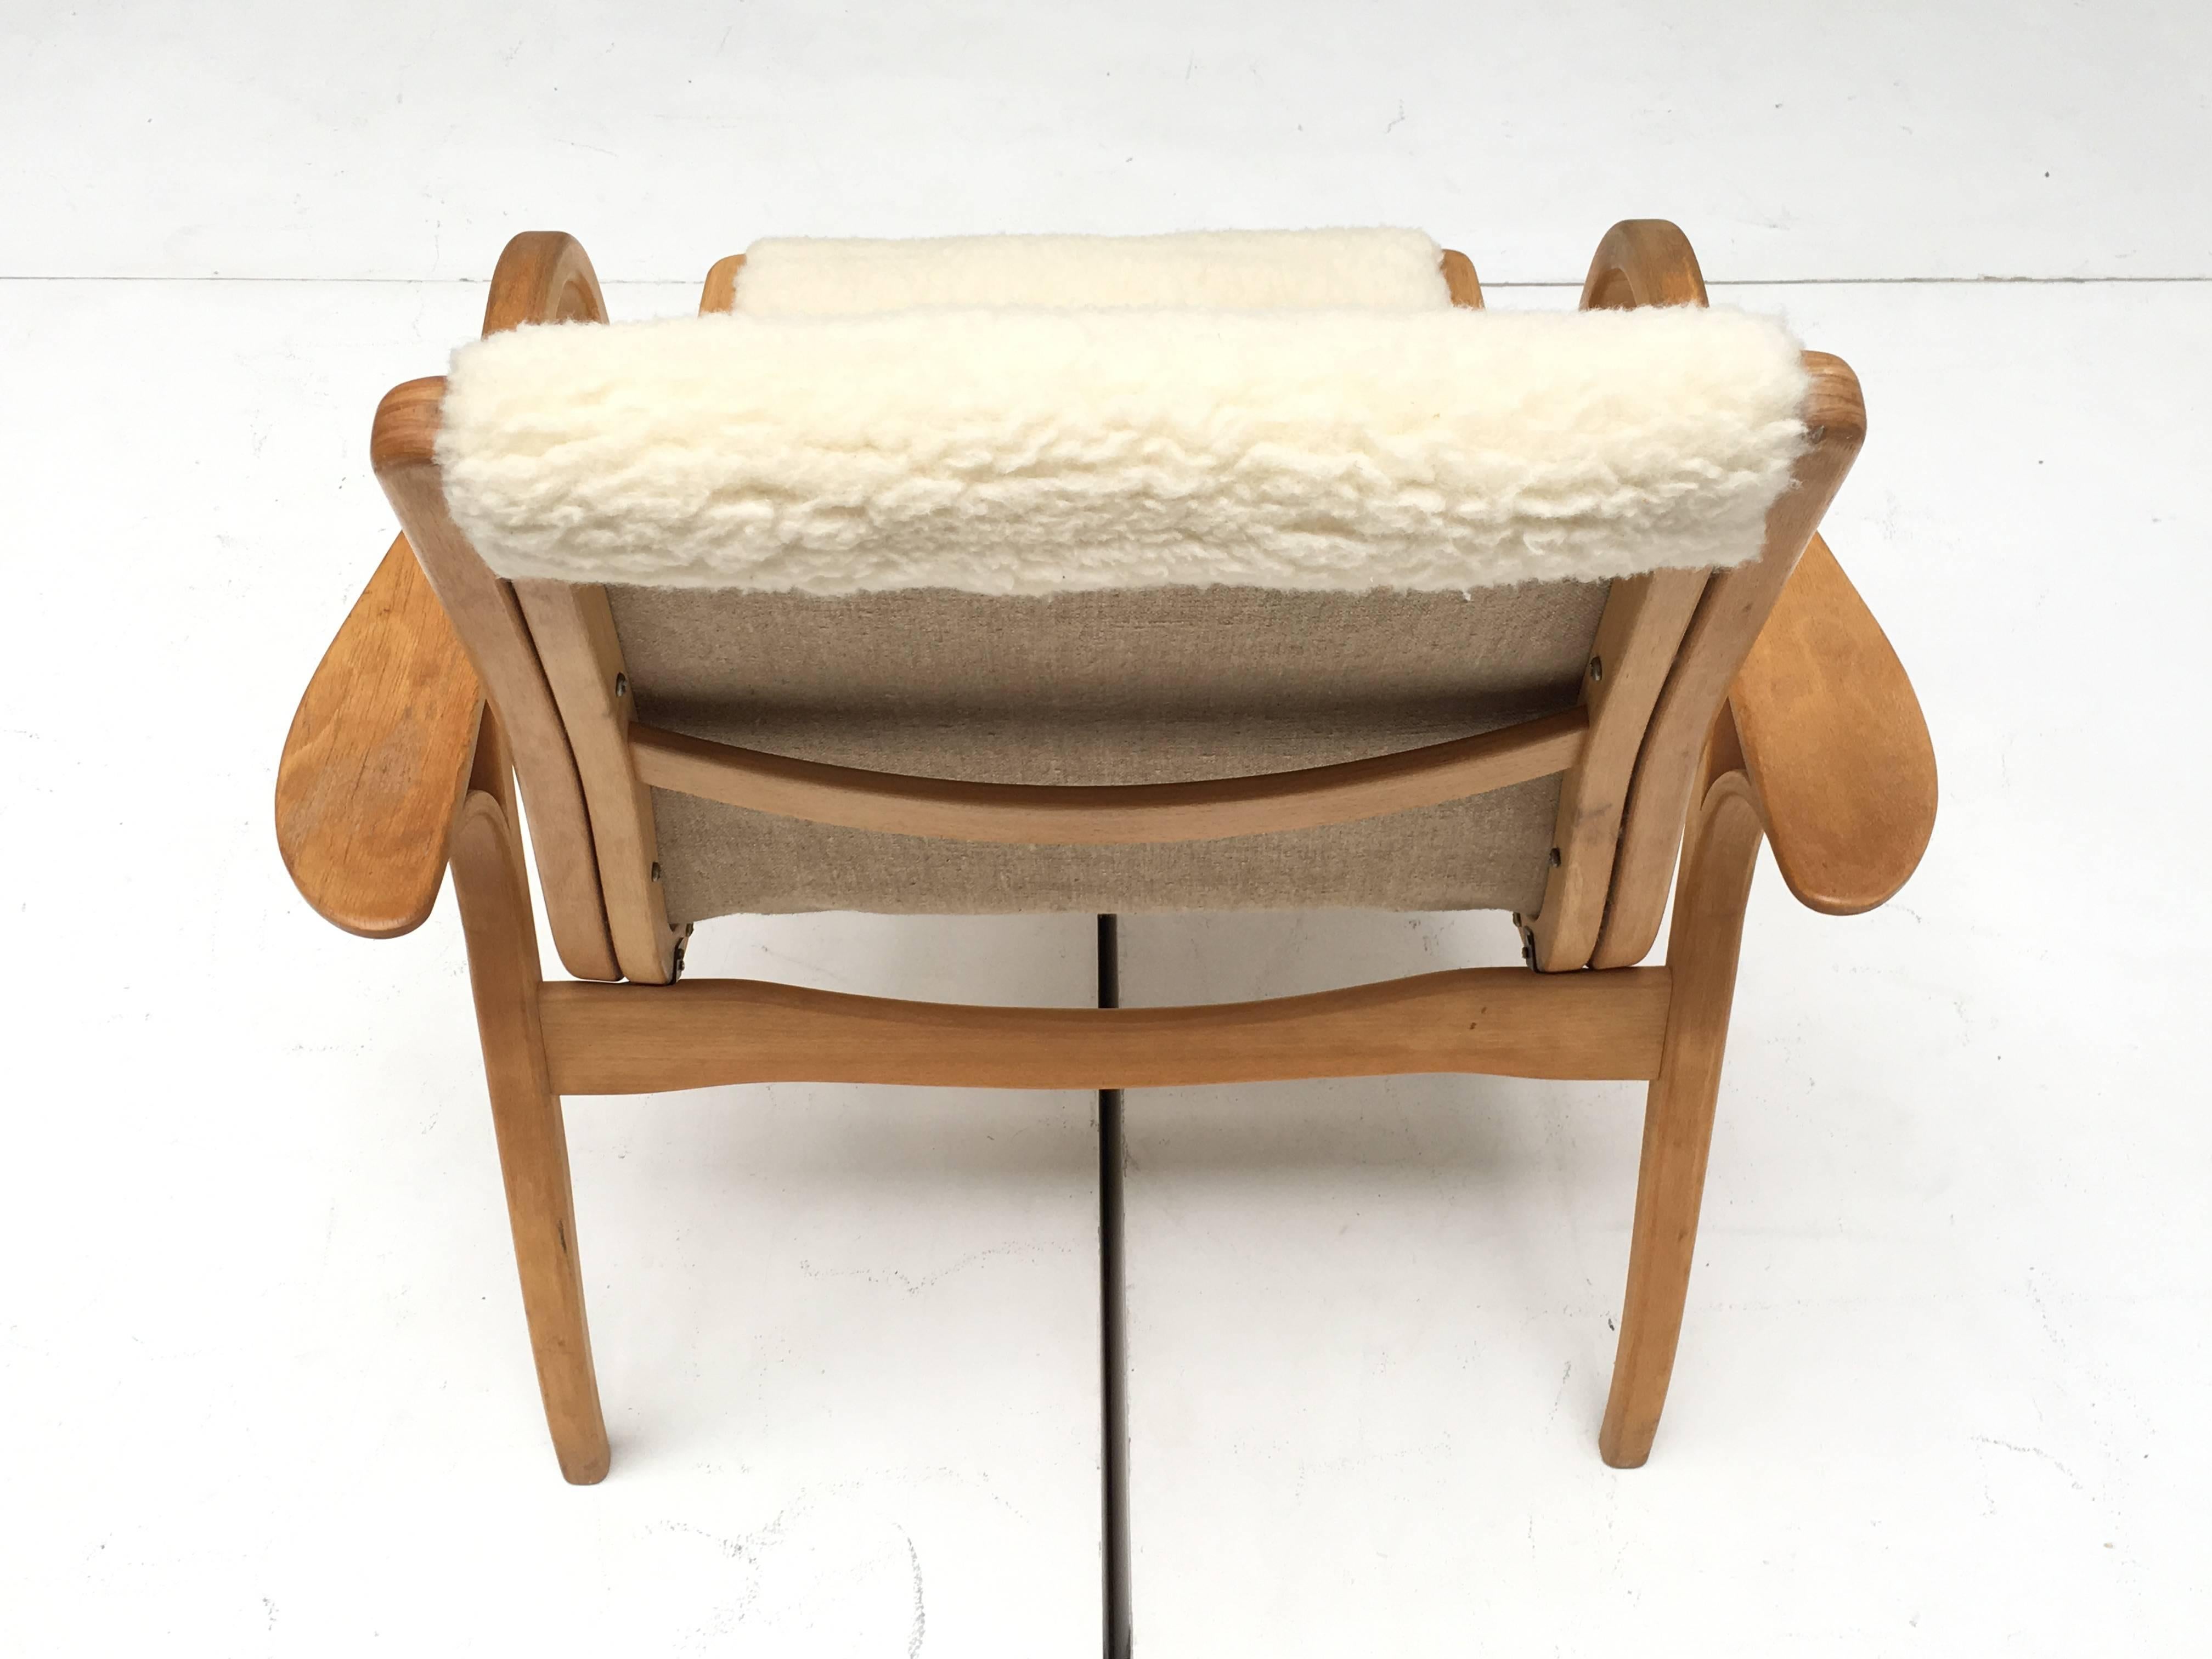 Upholstery Yngve Ekström Laminated Birch and Wool Upholstered 